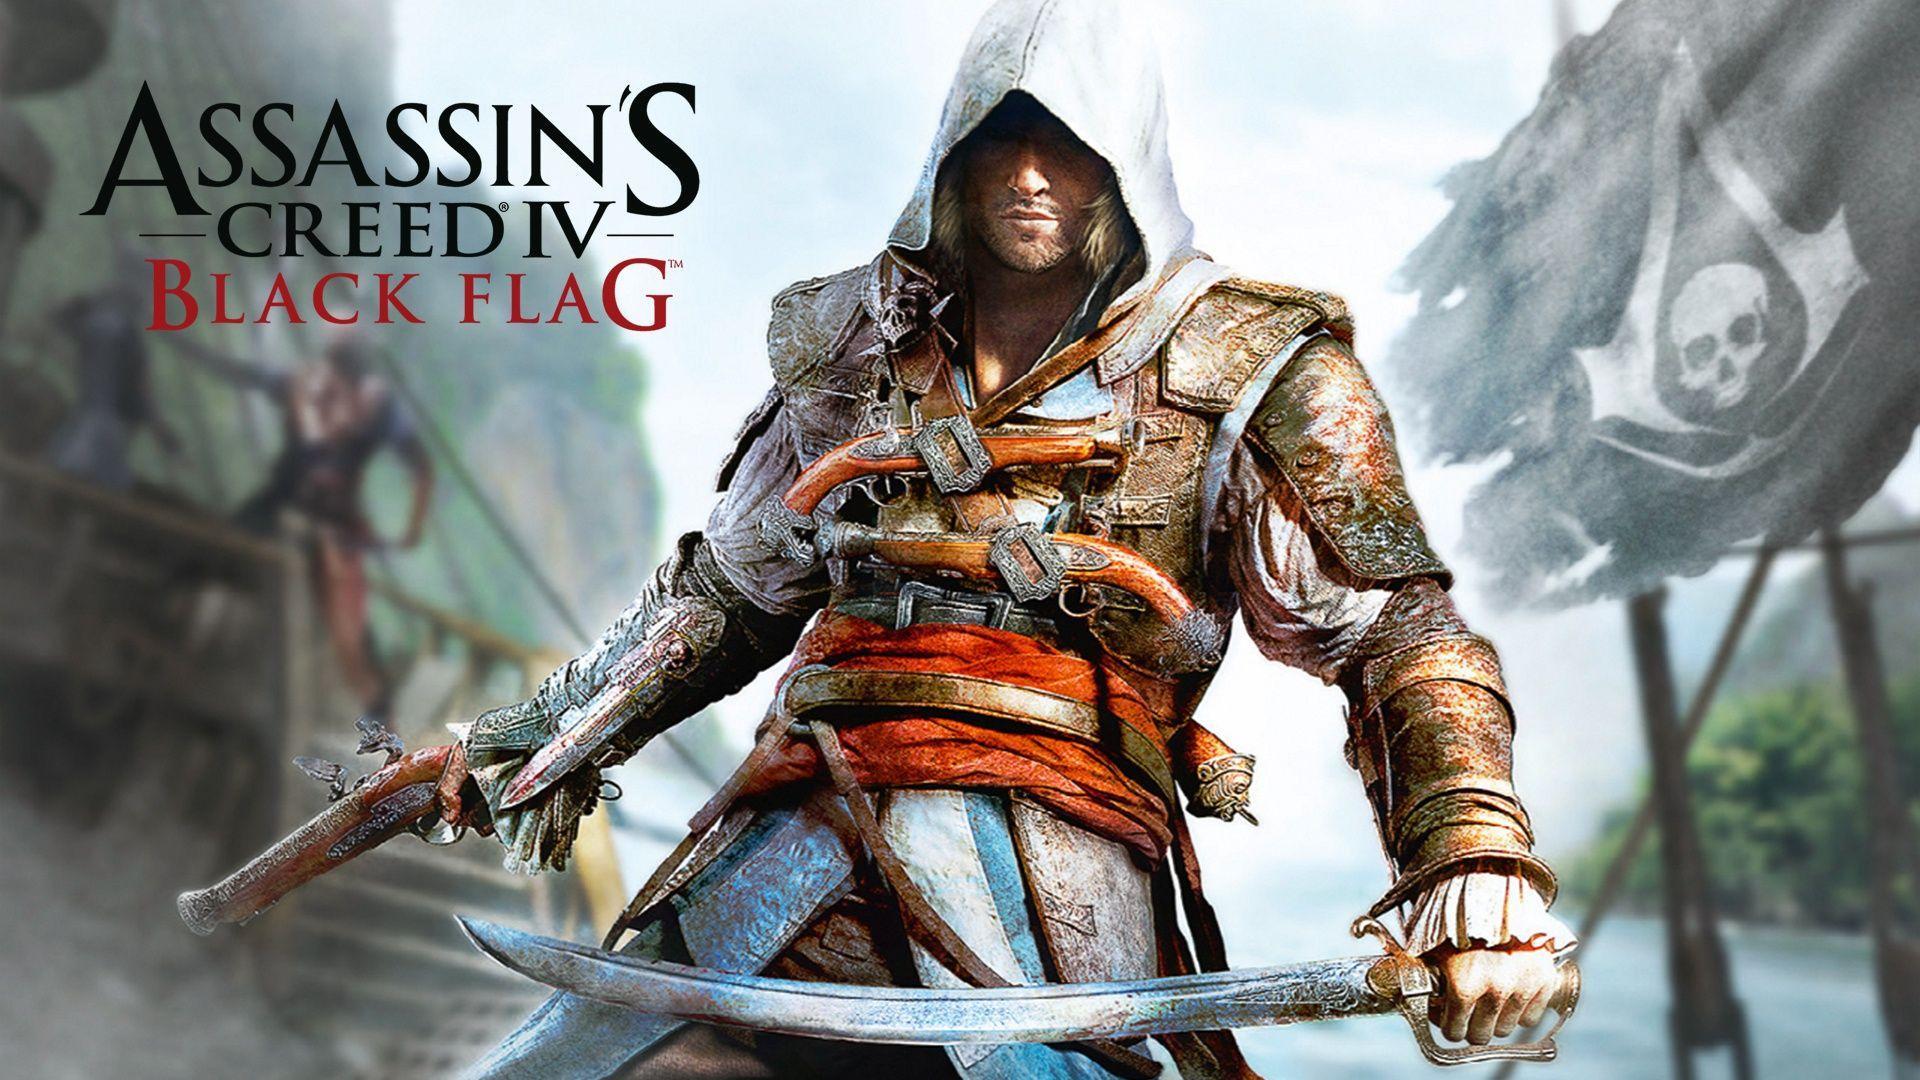 Assassins Creed Black Flag Wallpapers in jpg format for free download